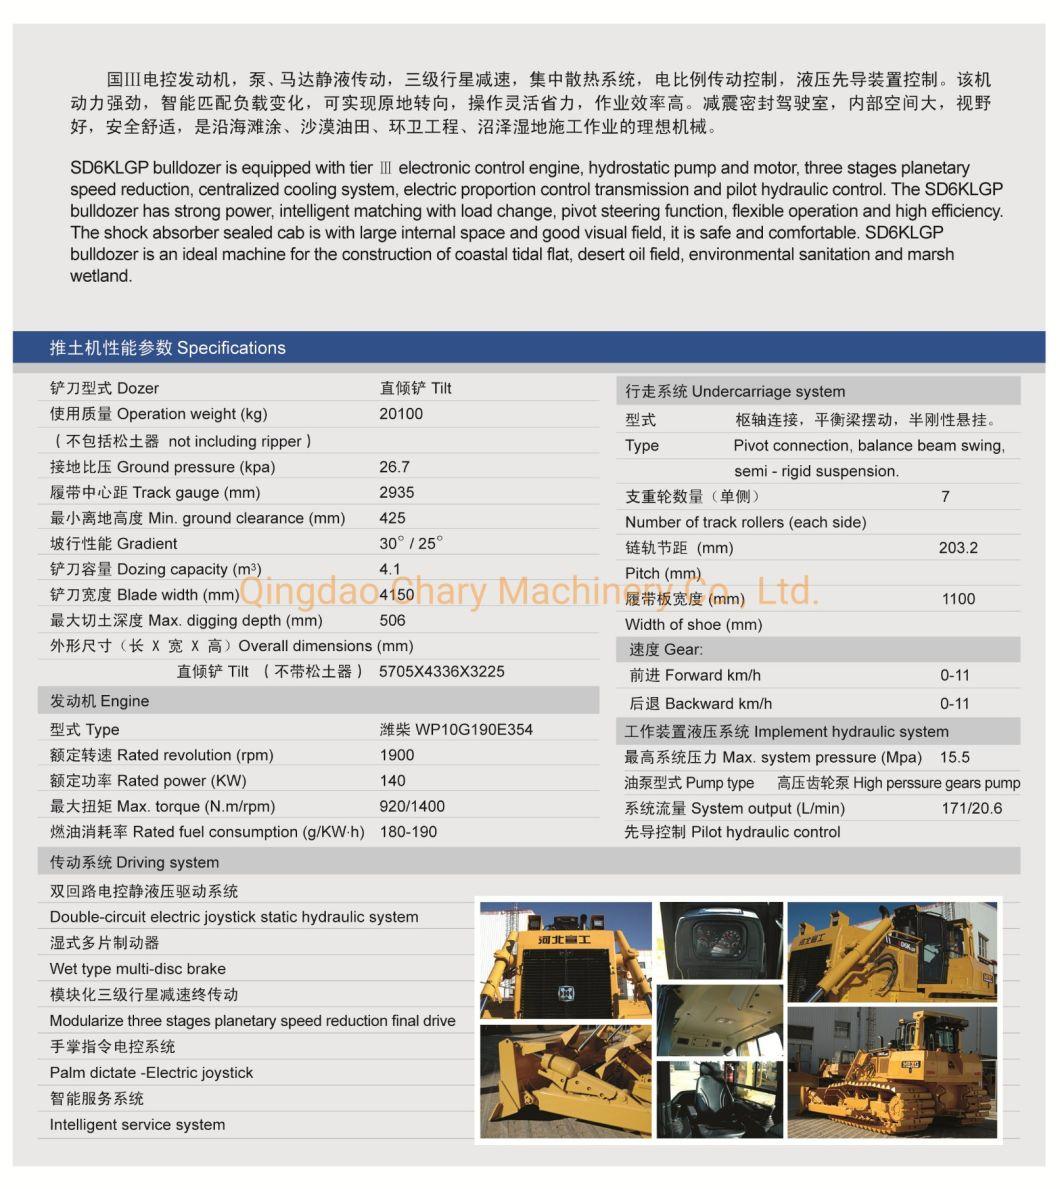 China Top Hbxg Small 160HP Bulldozer SD6n SD6 with Straight Blade